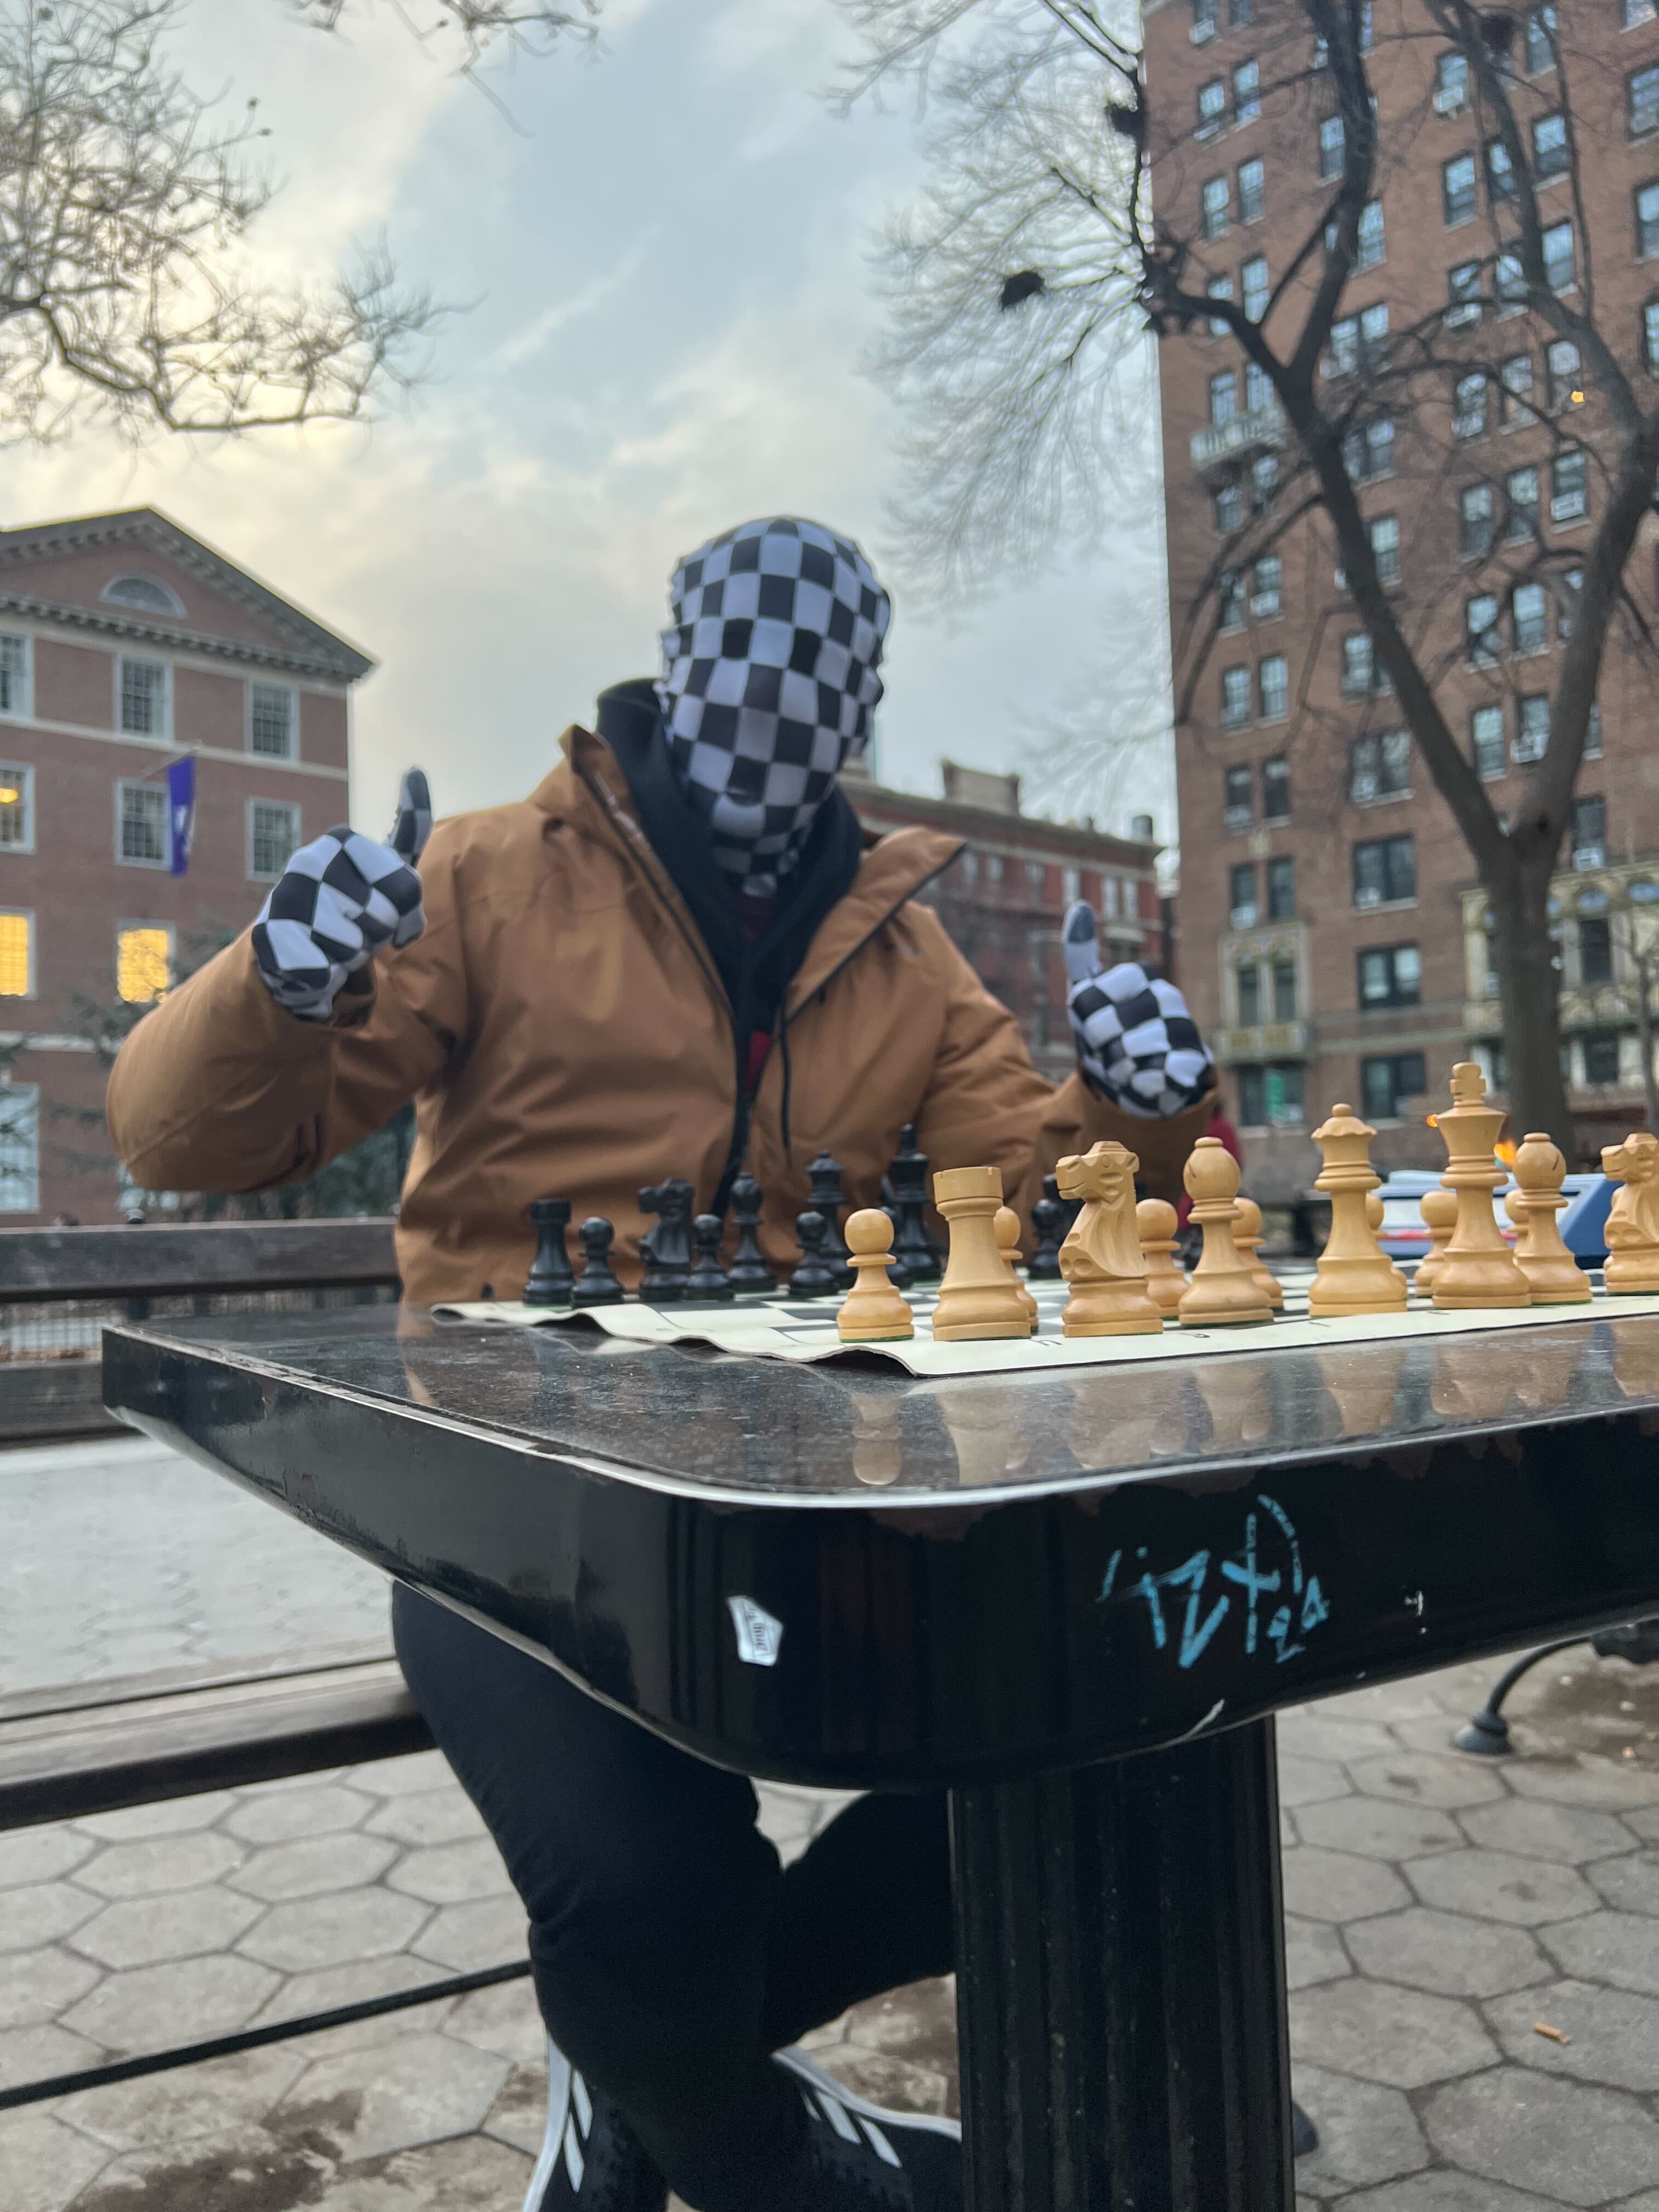 GothamChess on X: I am moving, so this is the last time we will